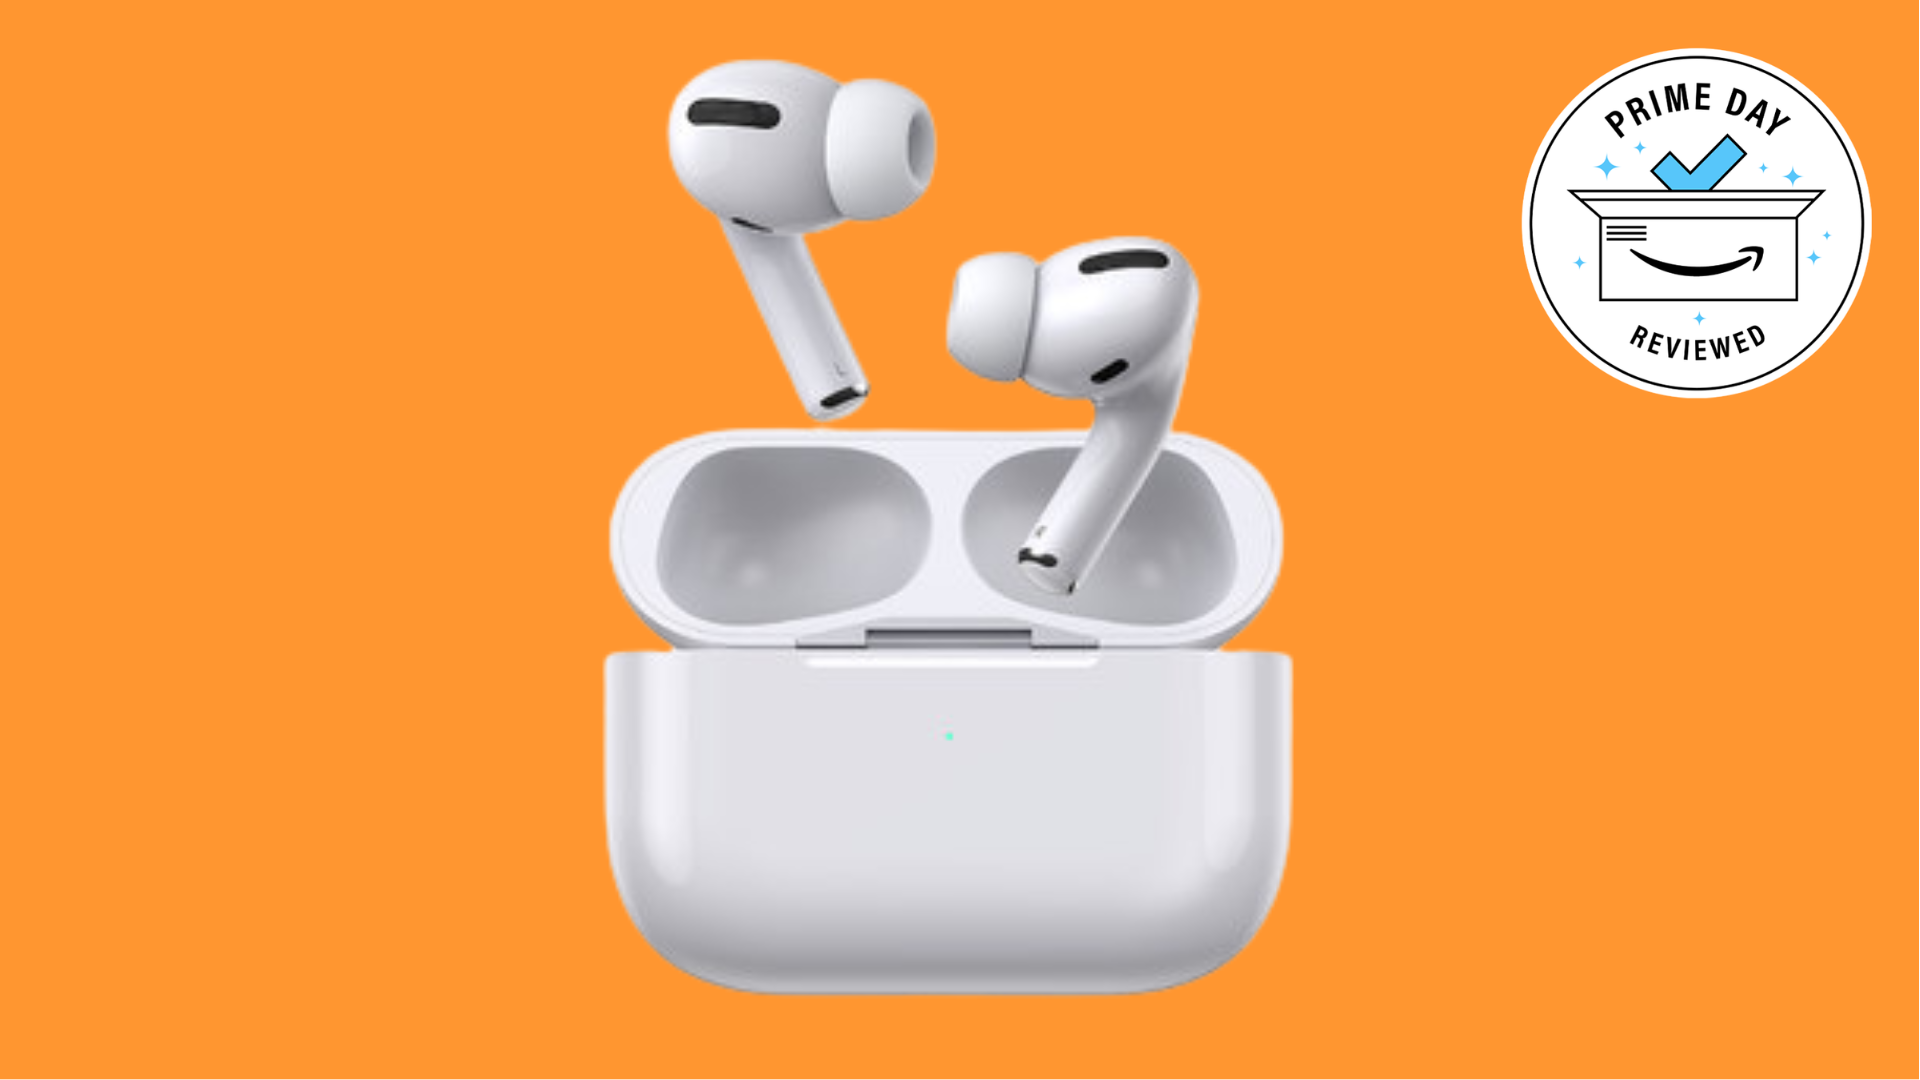 der Afskrække Optage Apple AirPods Pro deal: Save $79 with this Amazon Prime Day deal